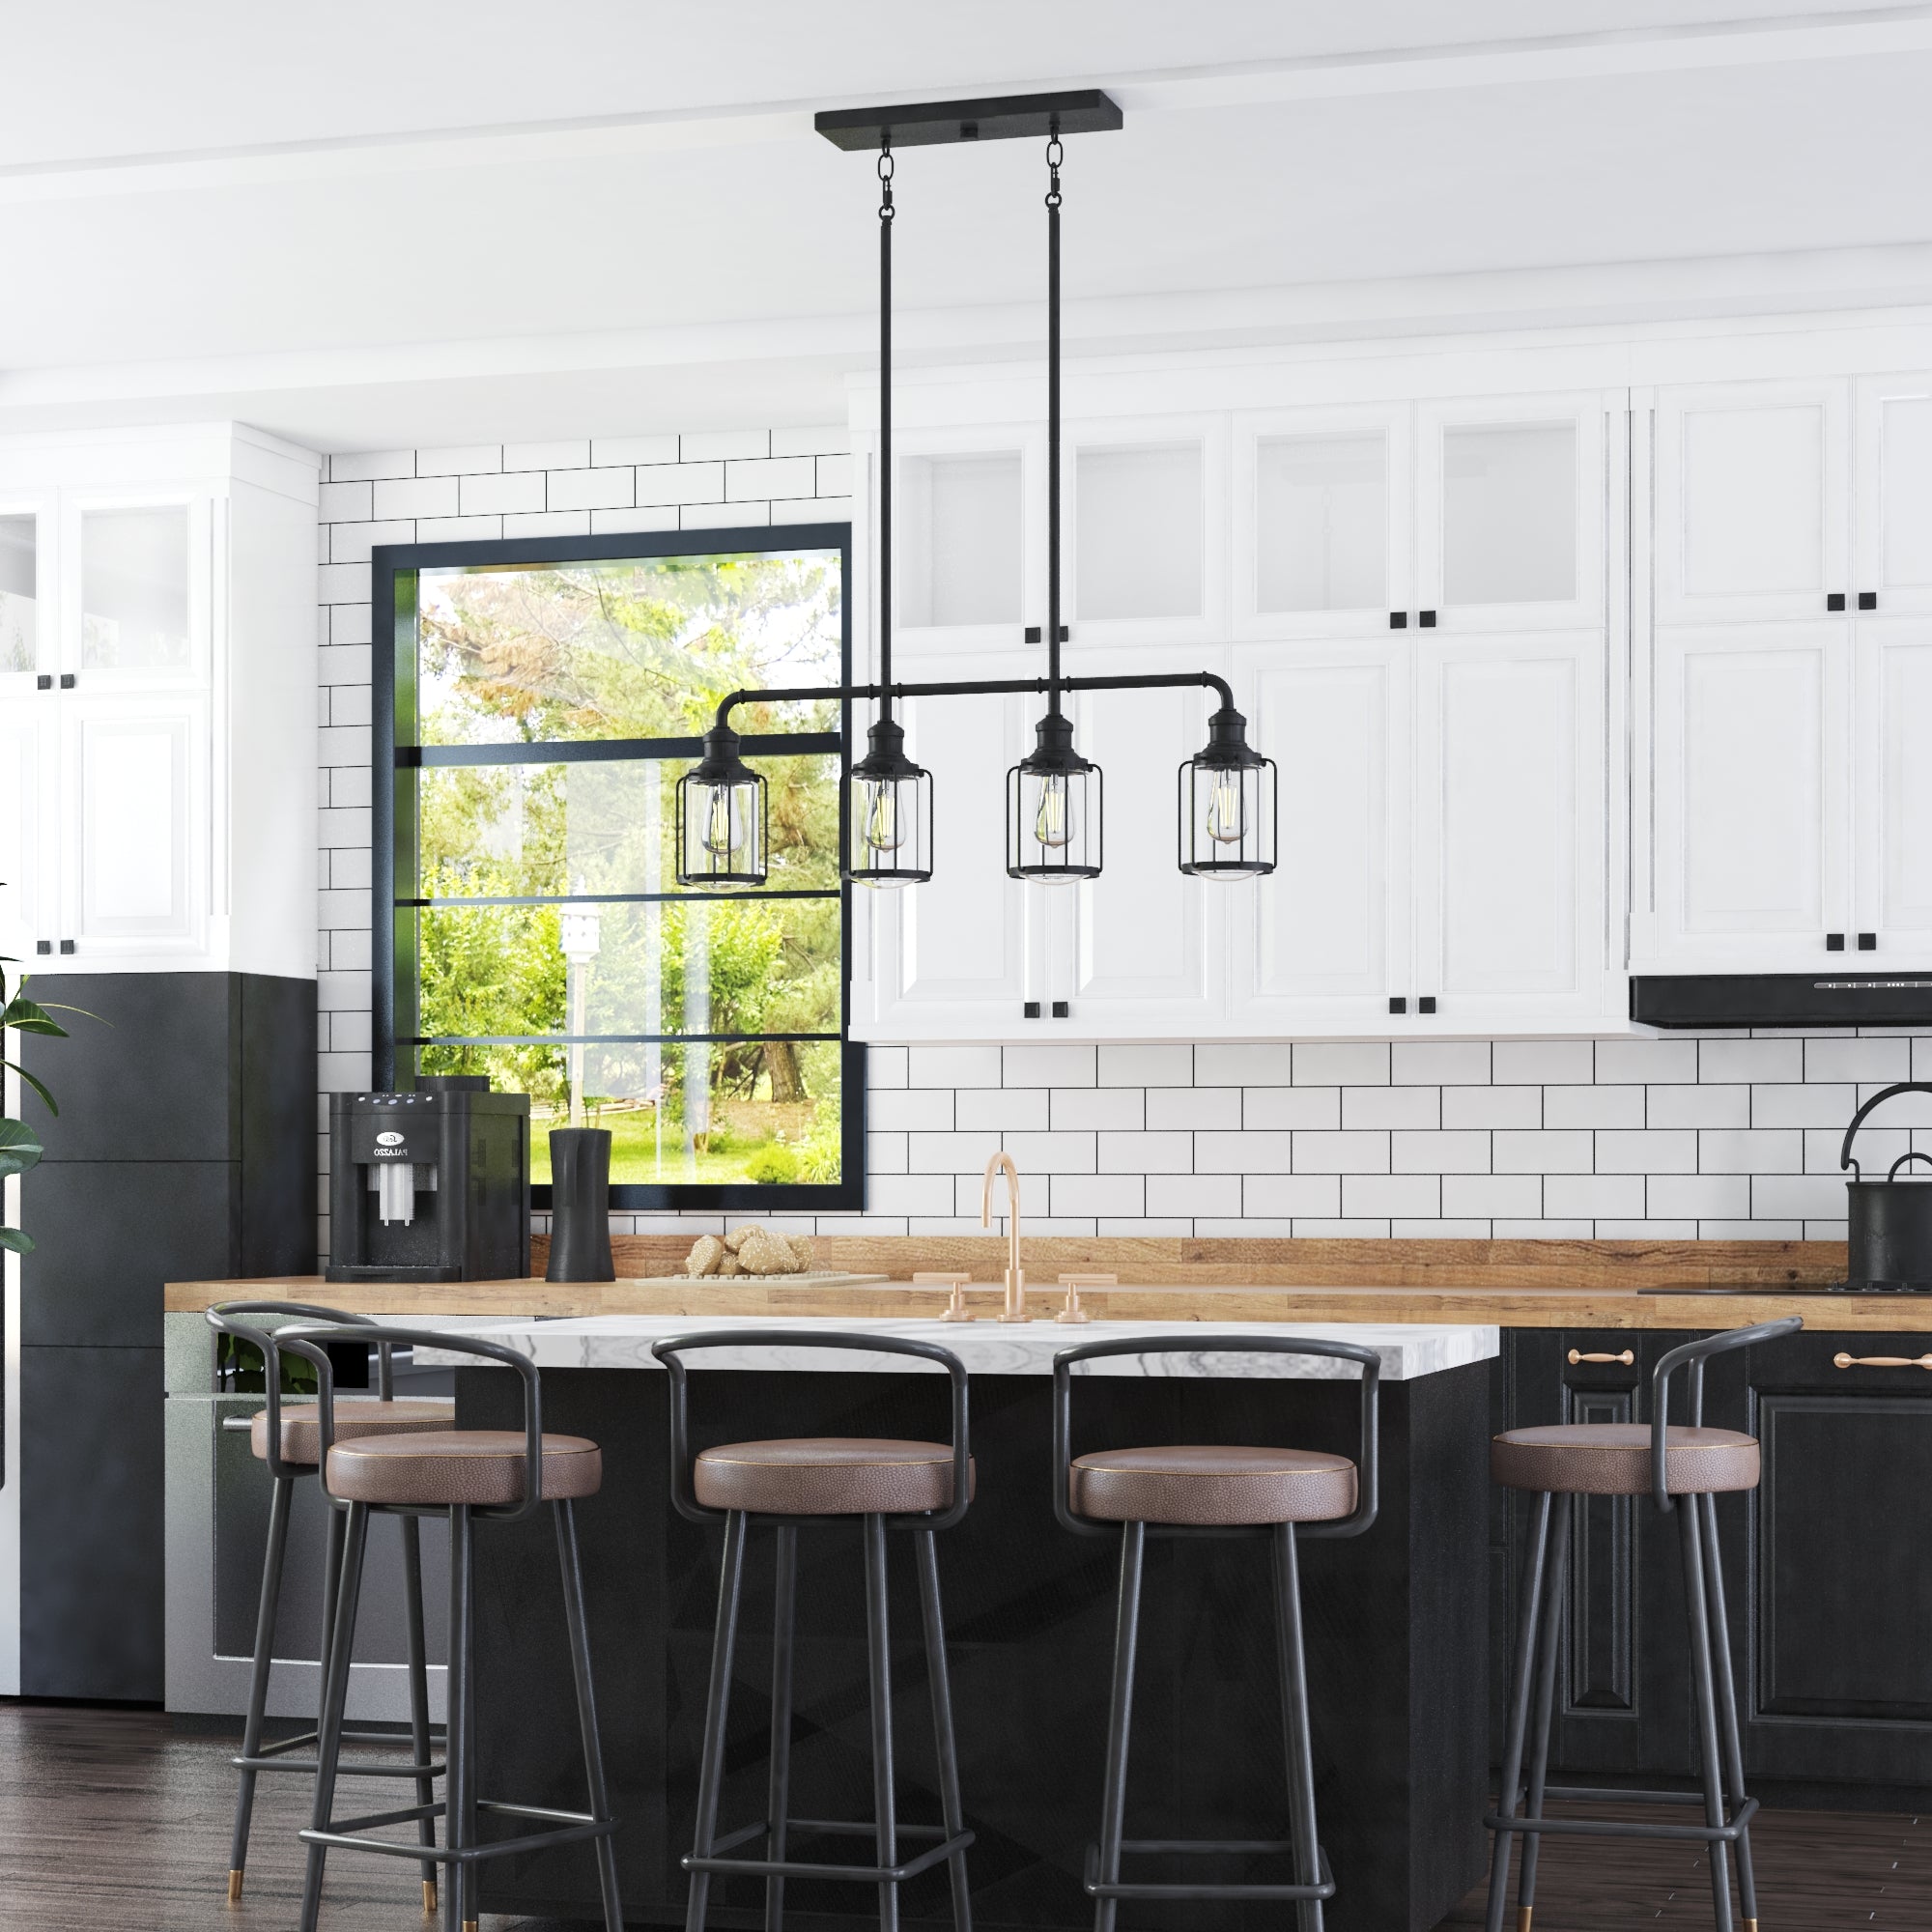 Lincoln Woods, Linear Pendant Light, Four Light, Matte Black by Prominence Home